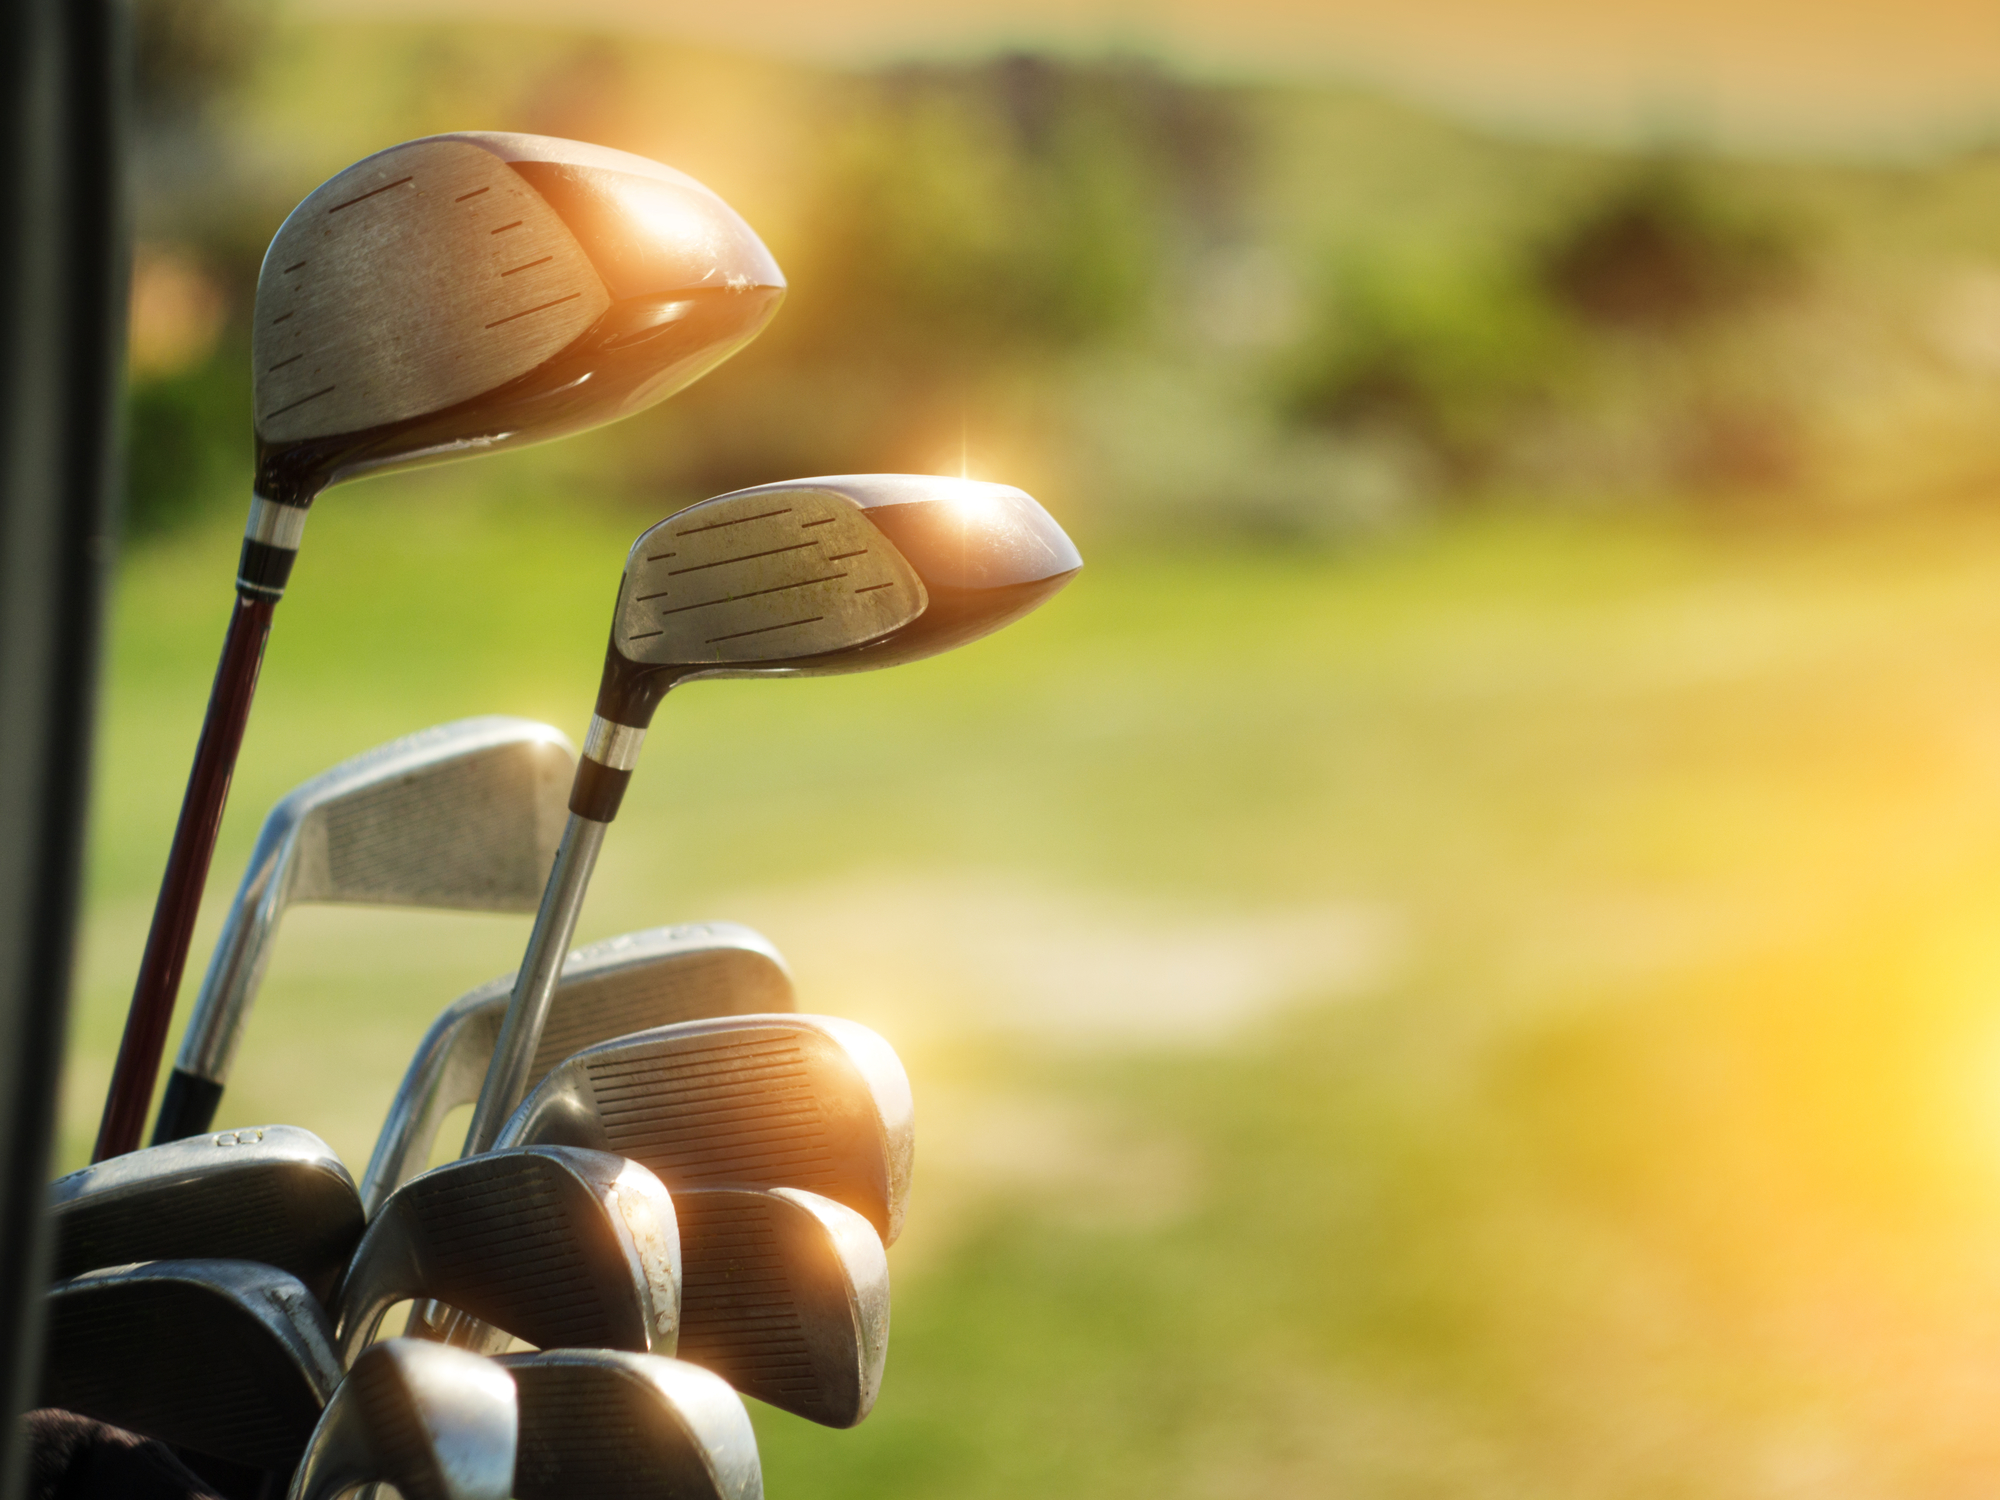 A Beginner's Guide on How to Learn Golf